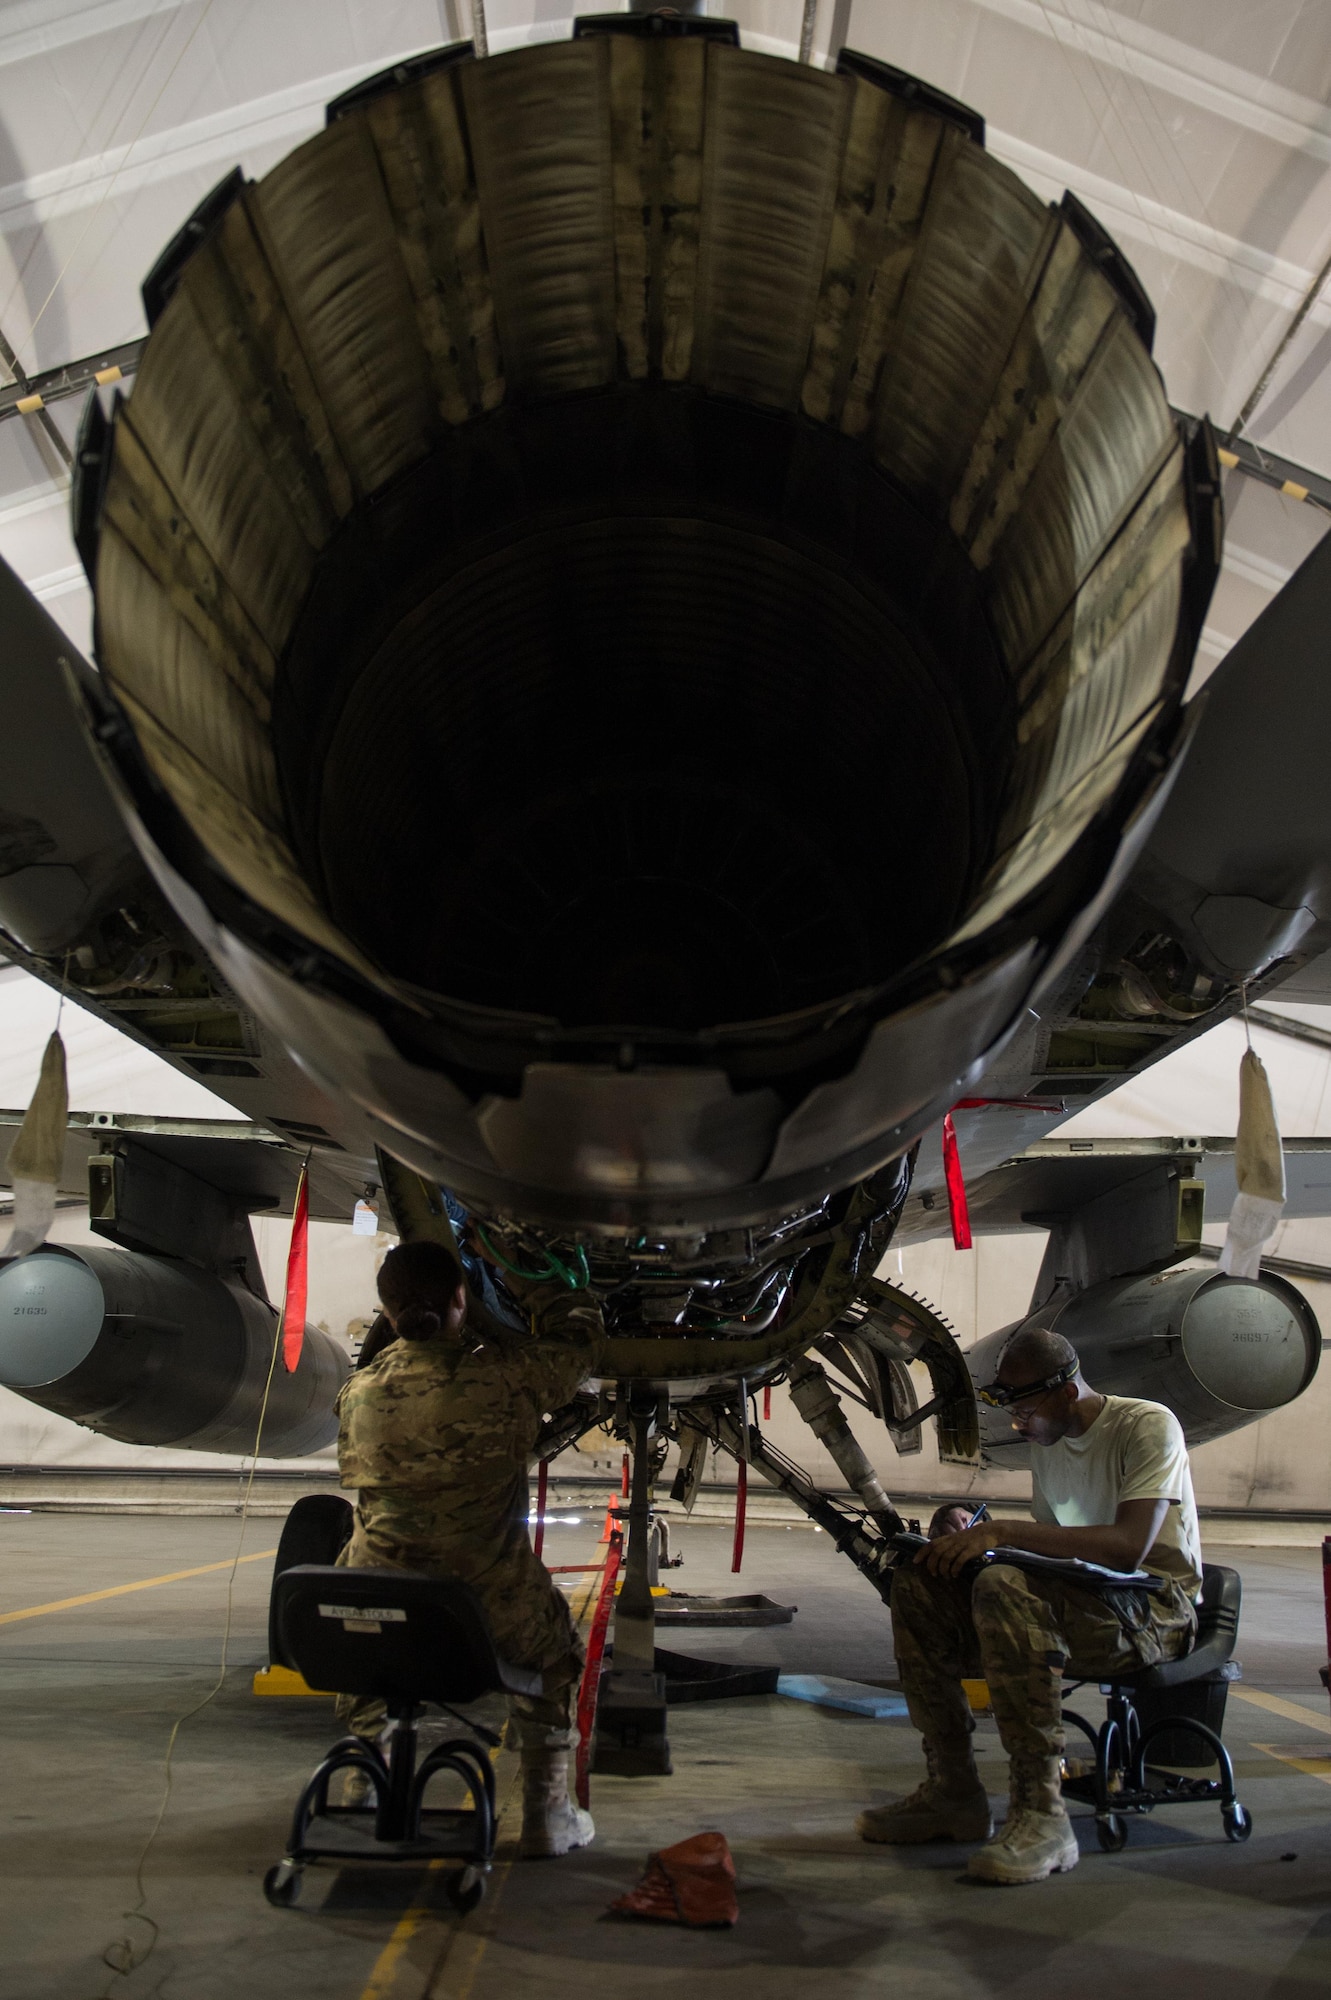 U.S. Air Force Staff Sgt. Donterrio Erby and Senior Airman Jaid Downing, both assigned to the 455th Expeditionary Maintenance Squadron, perform a 400-hour engine inspection on an F-16 Fighting Falcon aircraft at Bagram Airfield, Afghanistan, June 9, 2015. The 455th EAMXS ensure Fighting Falcons on Bagram are prepared for flight and return them to a mission-ready state once they land.  (U.S. Air Force photo by Tech. Sgt. Joseph Swafford/Released)